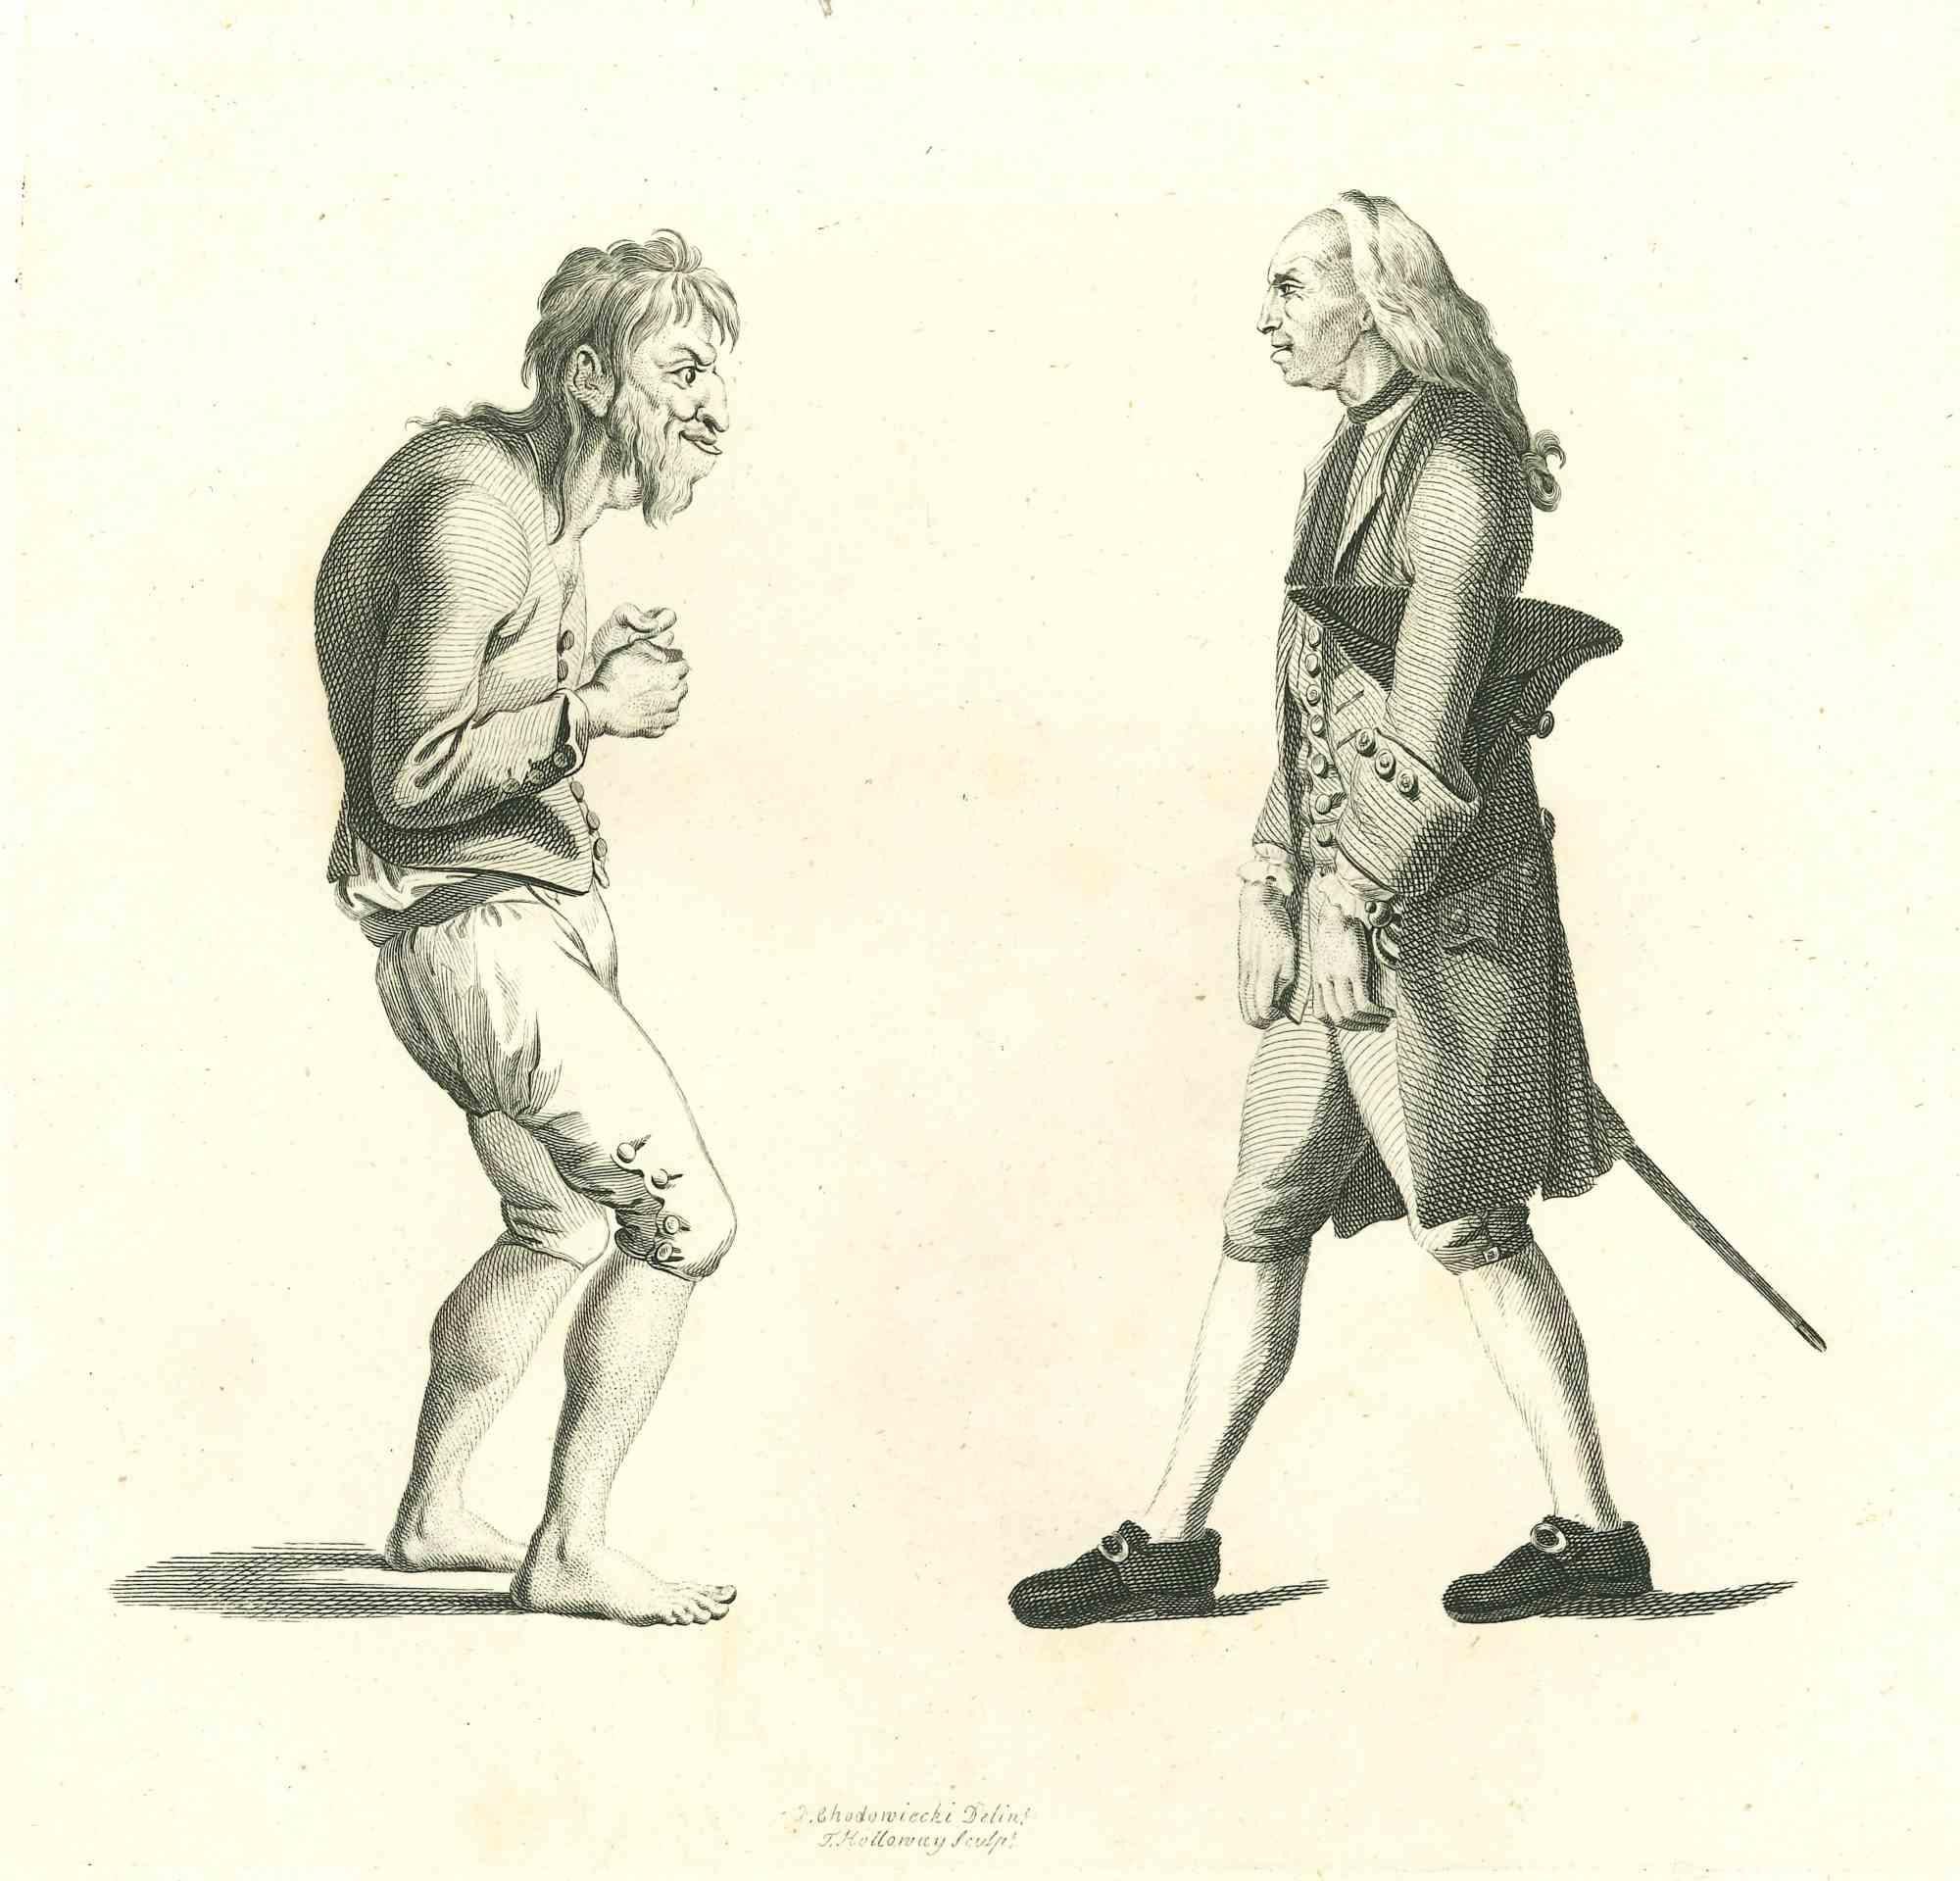 Portraits of Men is an artwork realized by Thomas Holloway for Johann Caspar Lavater's  "Essays on Physiognomy, Designed to promote the Knowledge and the Love of Mankind", London, Bensley, 1810. This artwork portrays two men. On the back of this